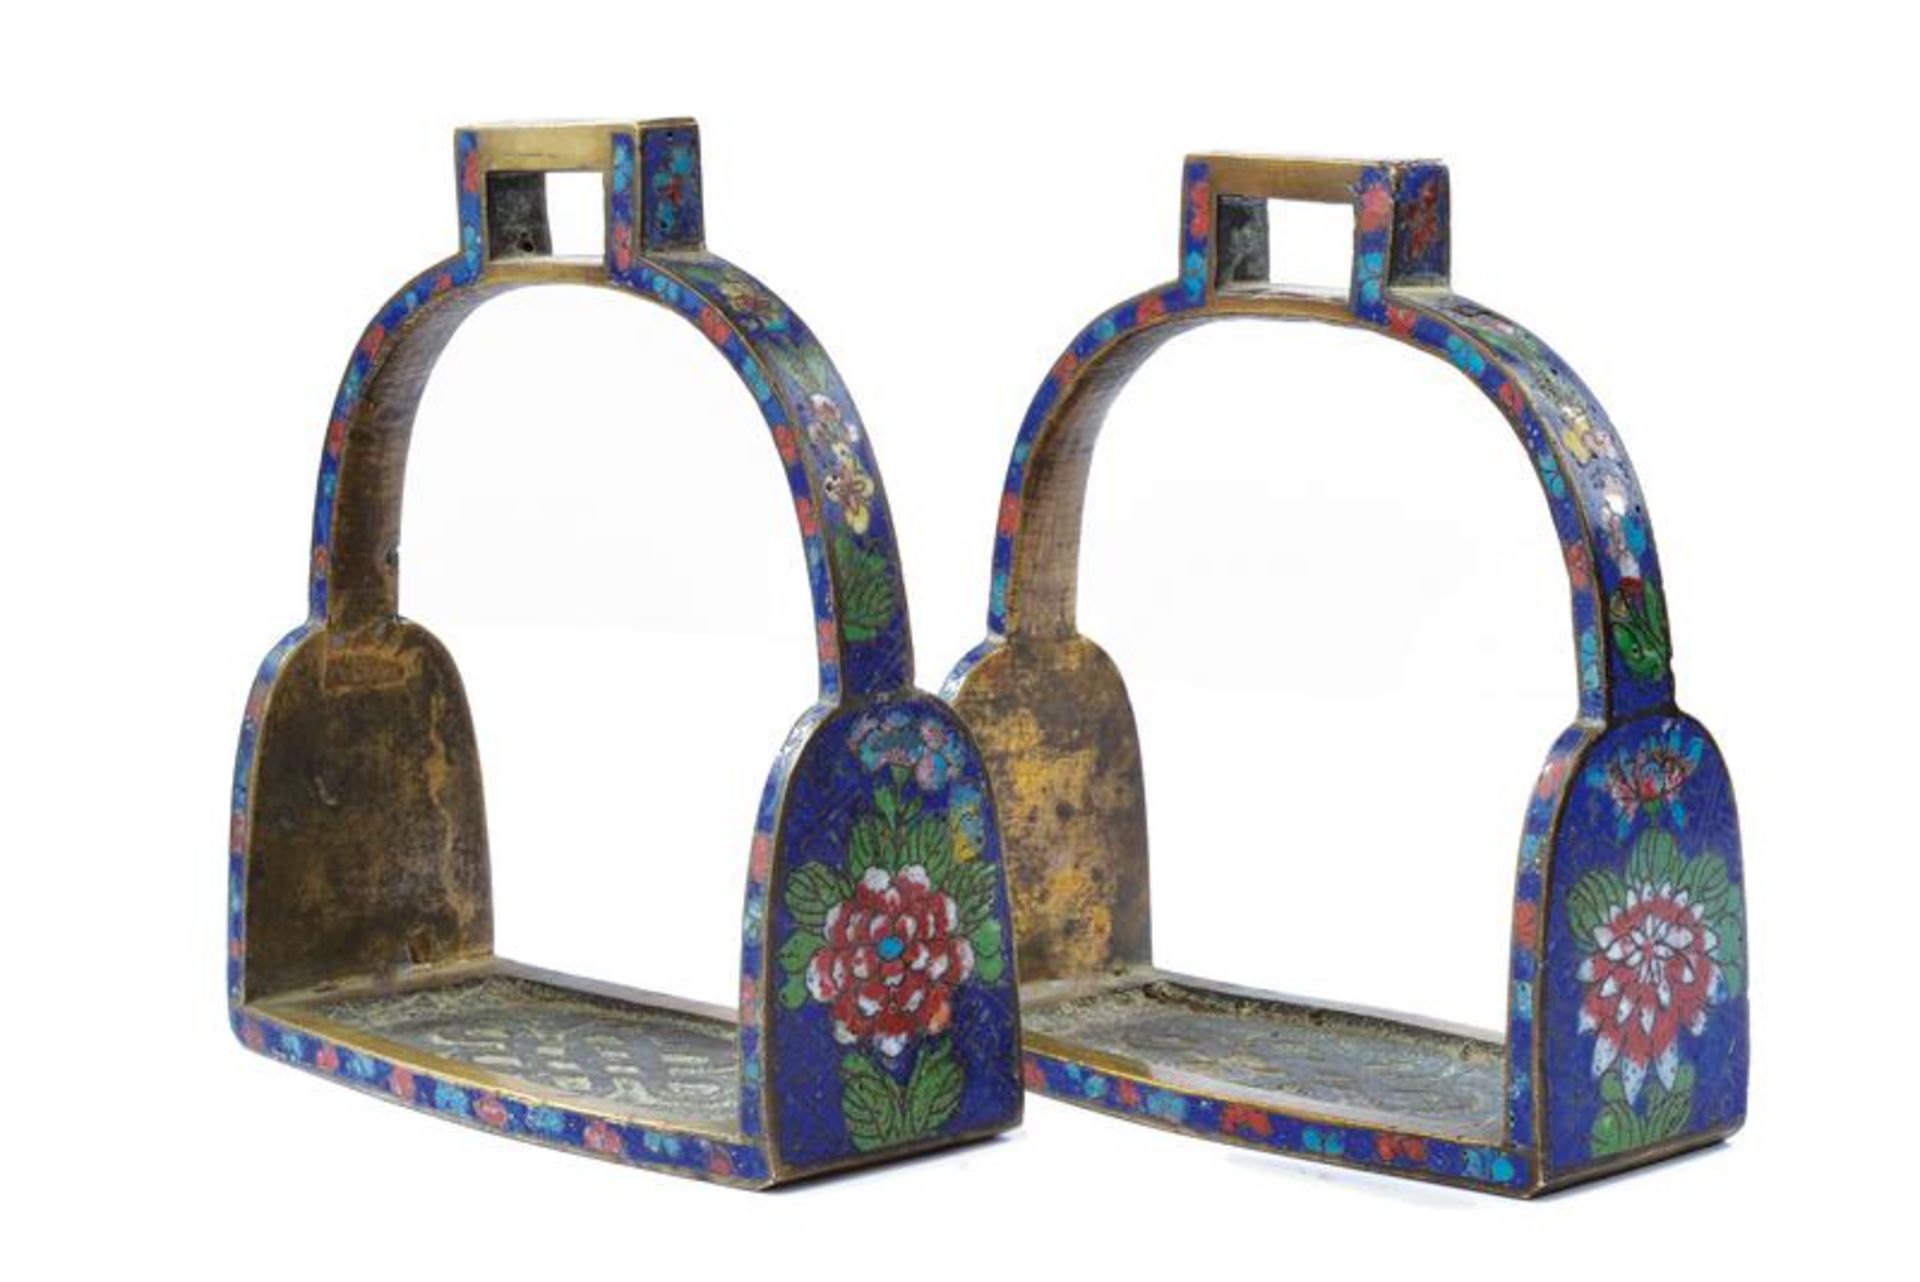 A pair of enameled stirrups